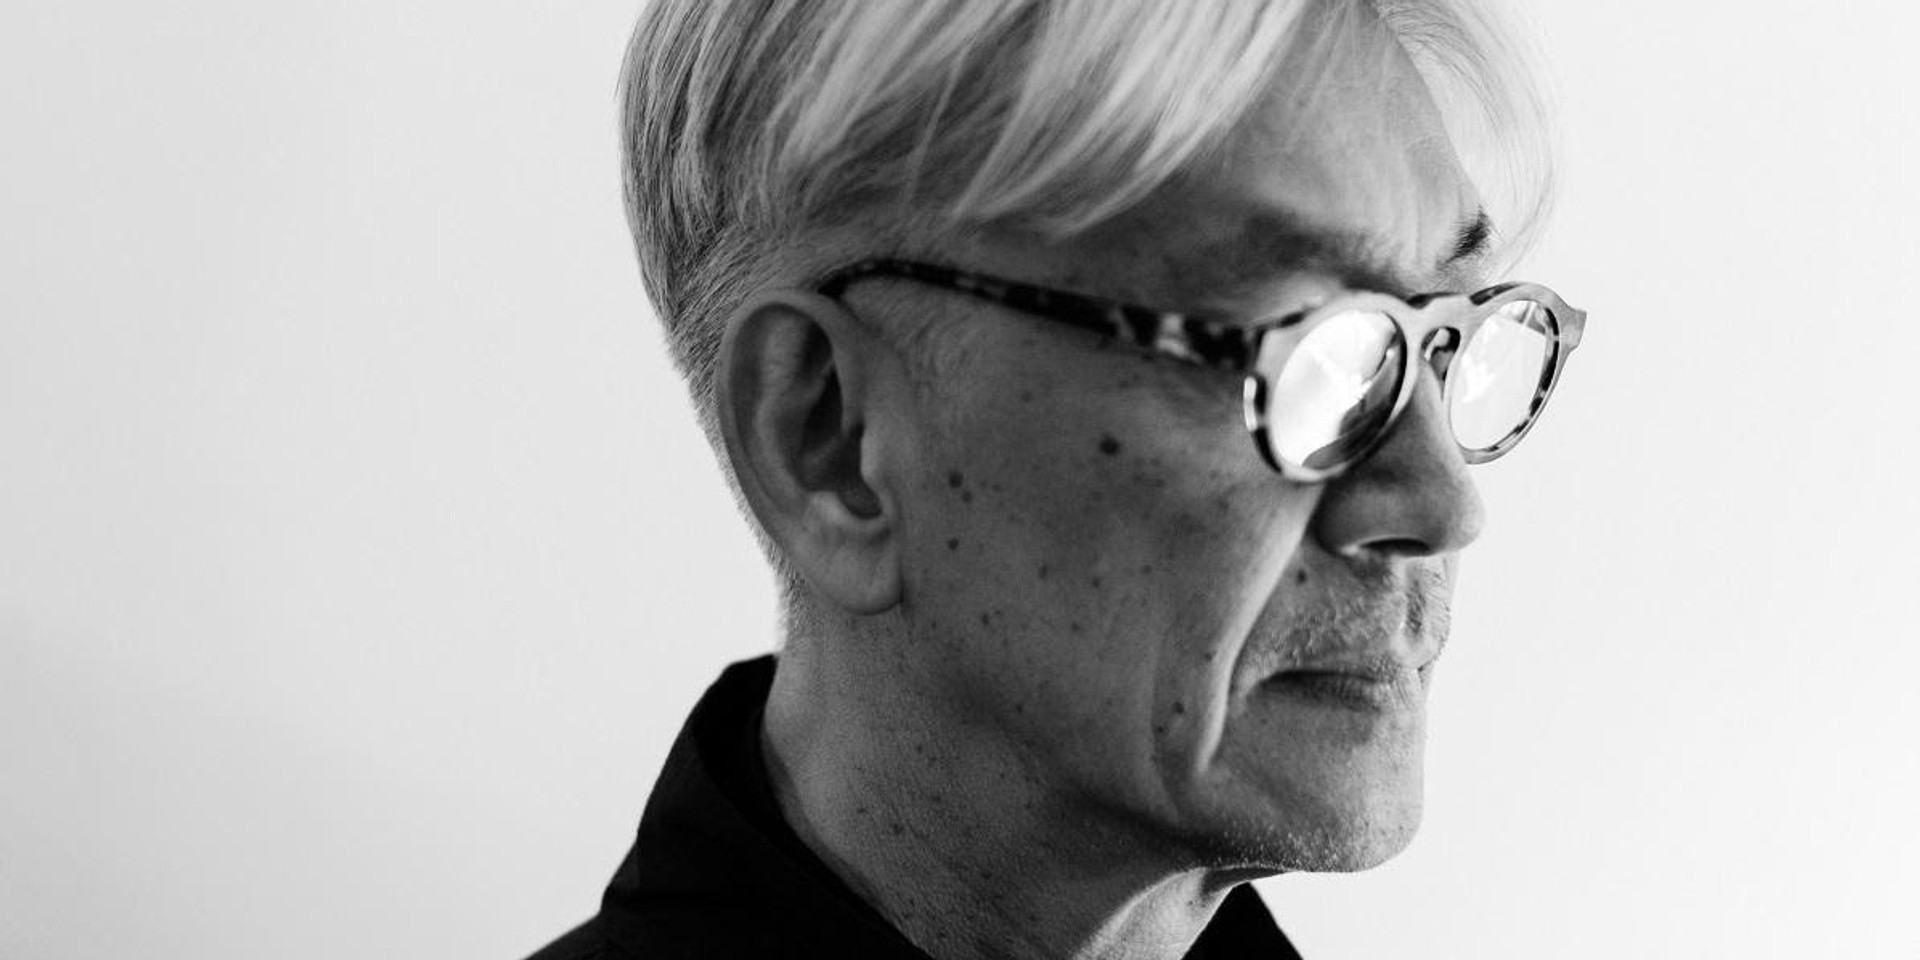 Ryuichi Sakamoto commemorates his 70th birthday with a special anniversary website and new single, 'Ieta'